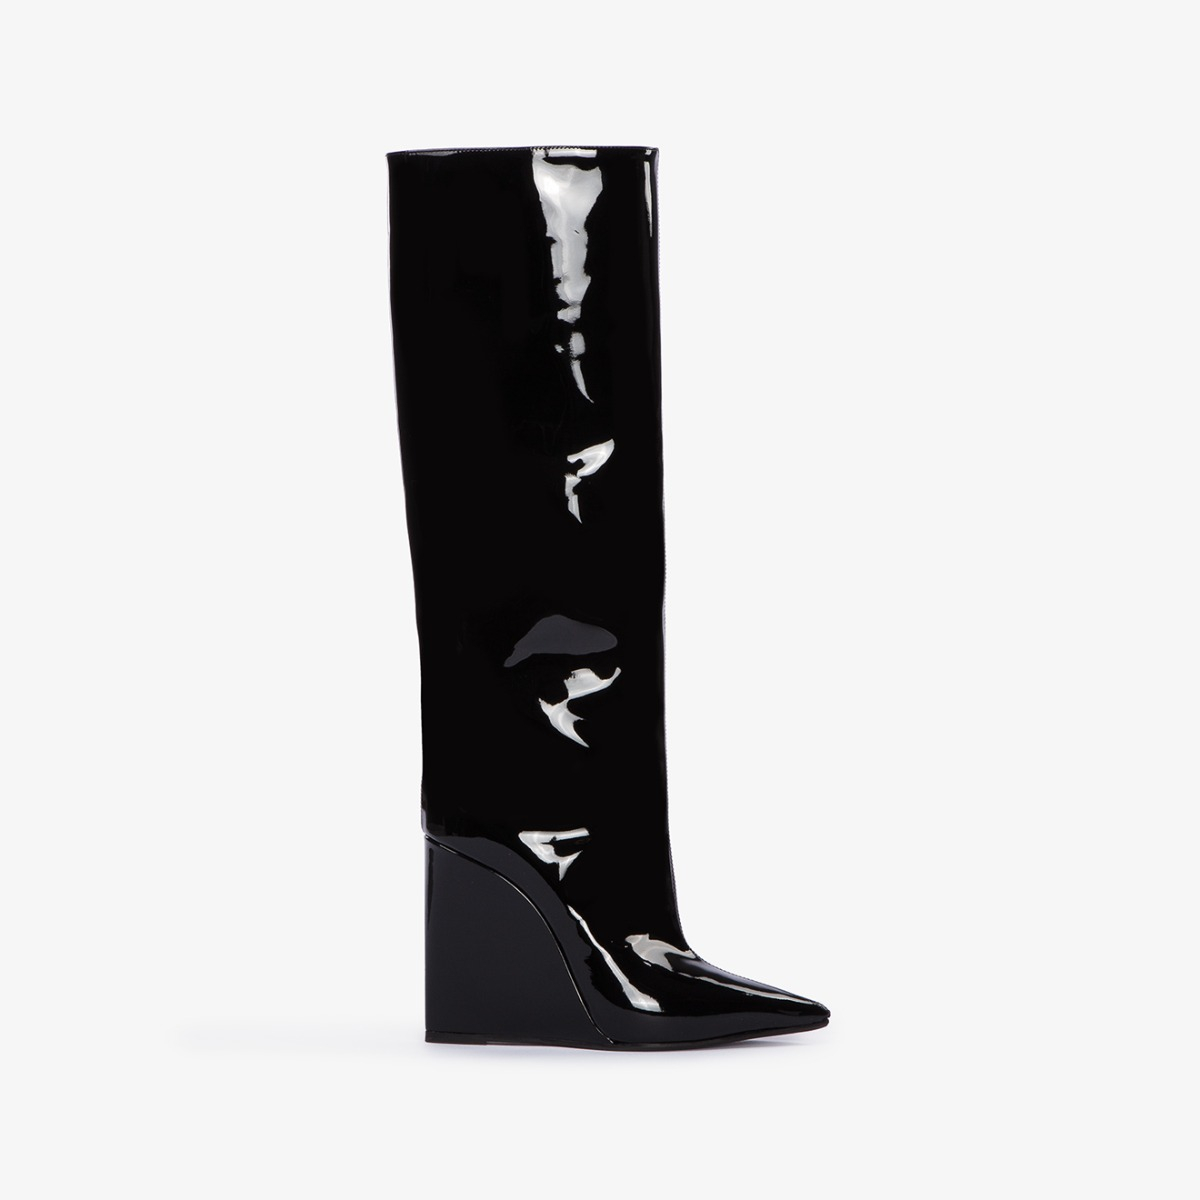 KIRA BOOT 120 mm - Le Silla | Official Online Store